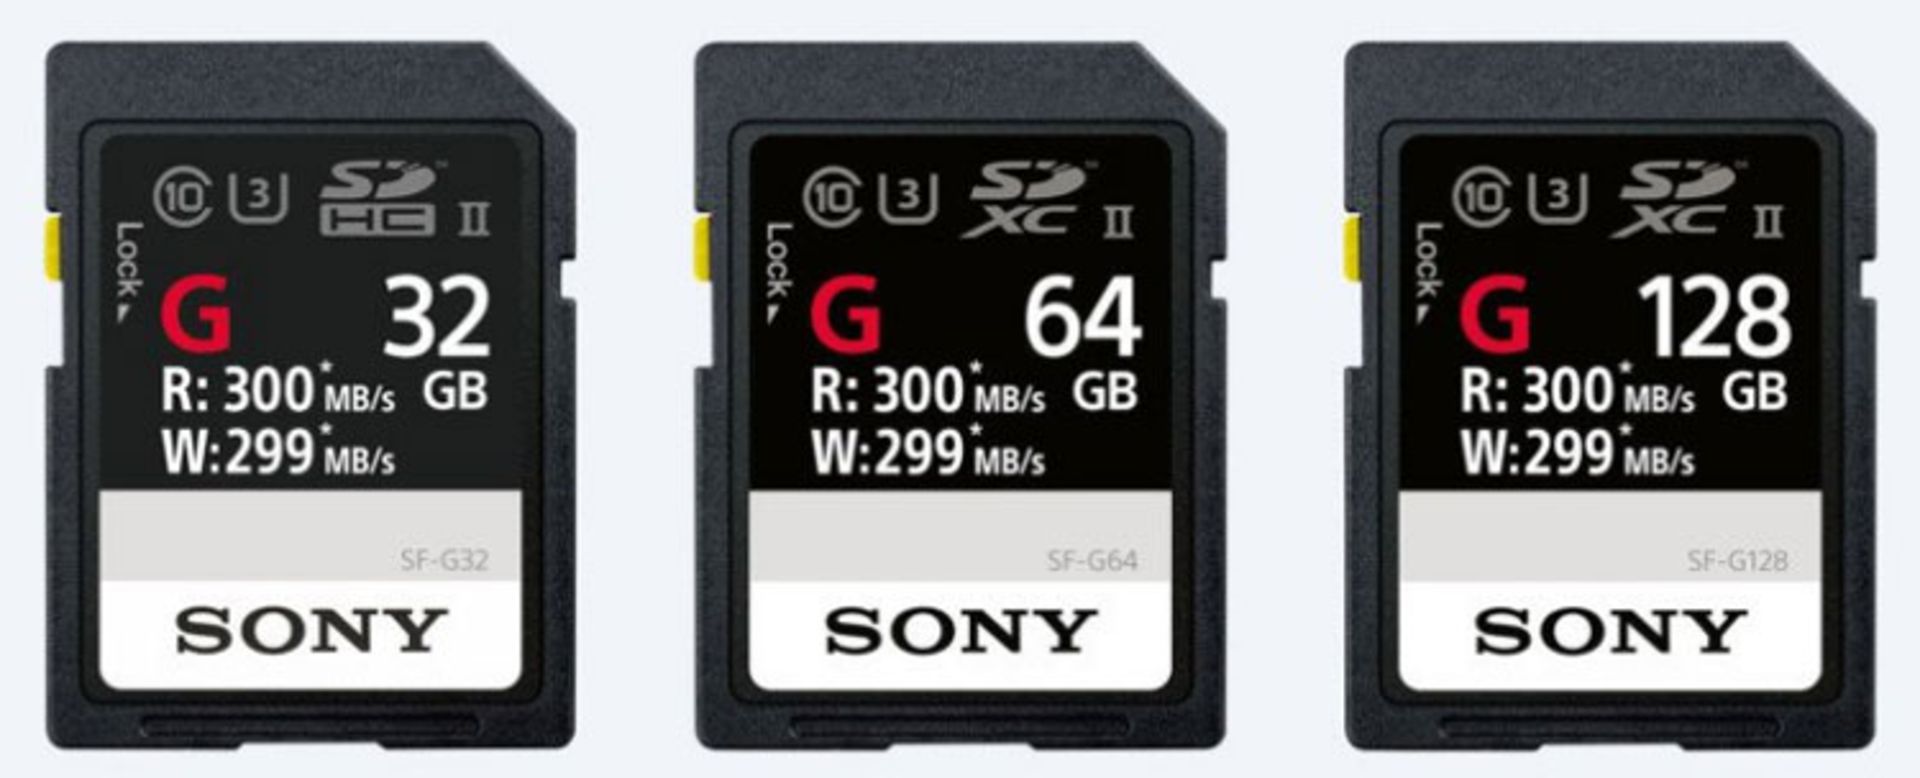 sony fast sd cards